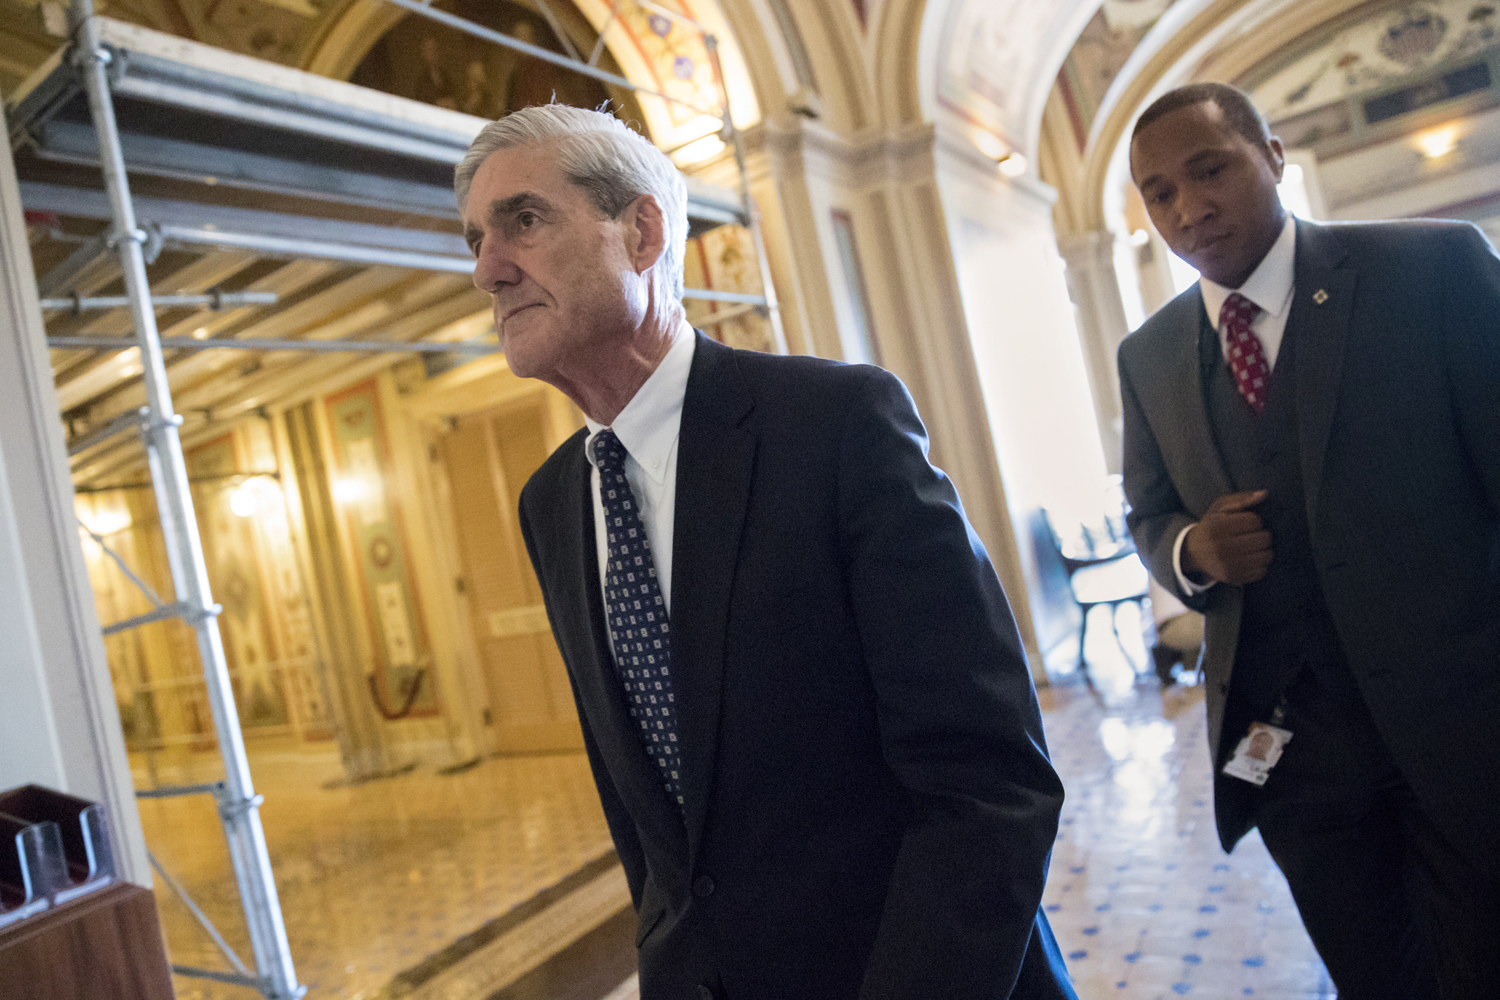 Special Counsel Robert Mueller departs after a closed-door meeting with members of the Senate Judiciary Committee at the Capitol in Washington, Wednesday, June 21, 2017. (J. Scott Applewhite/AP)